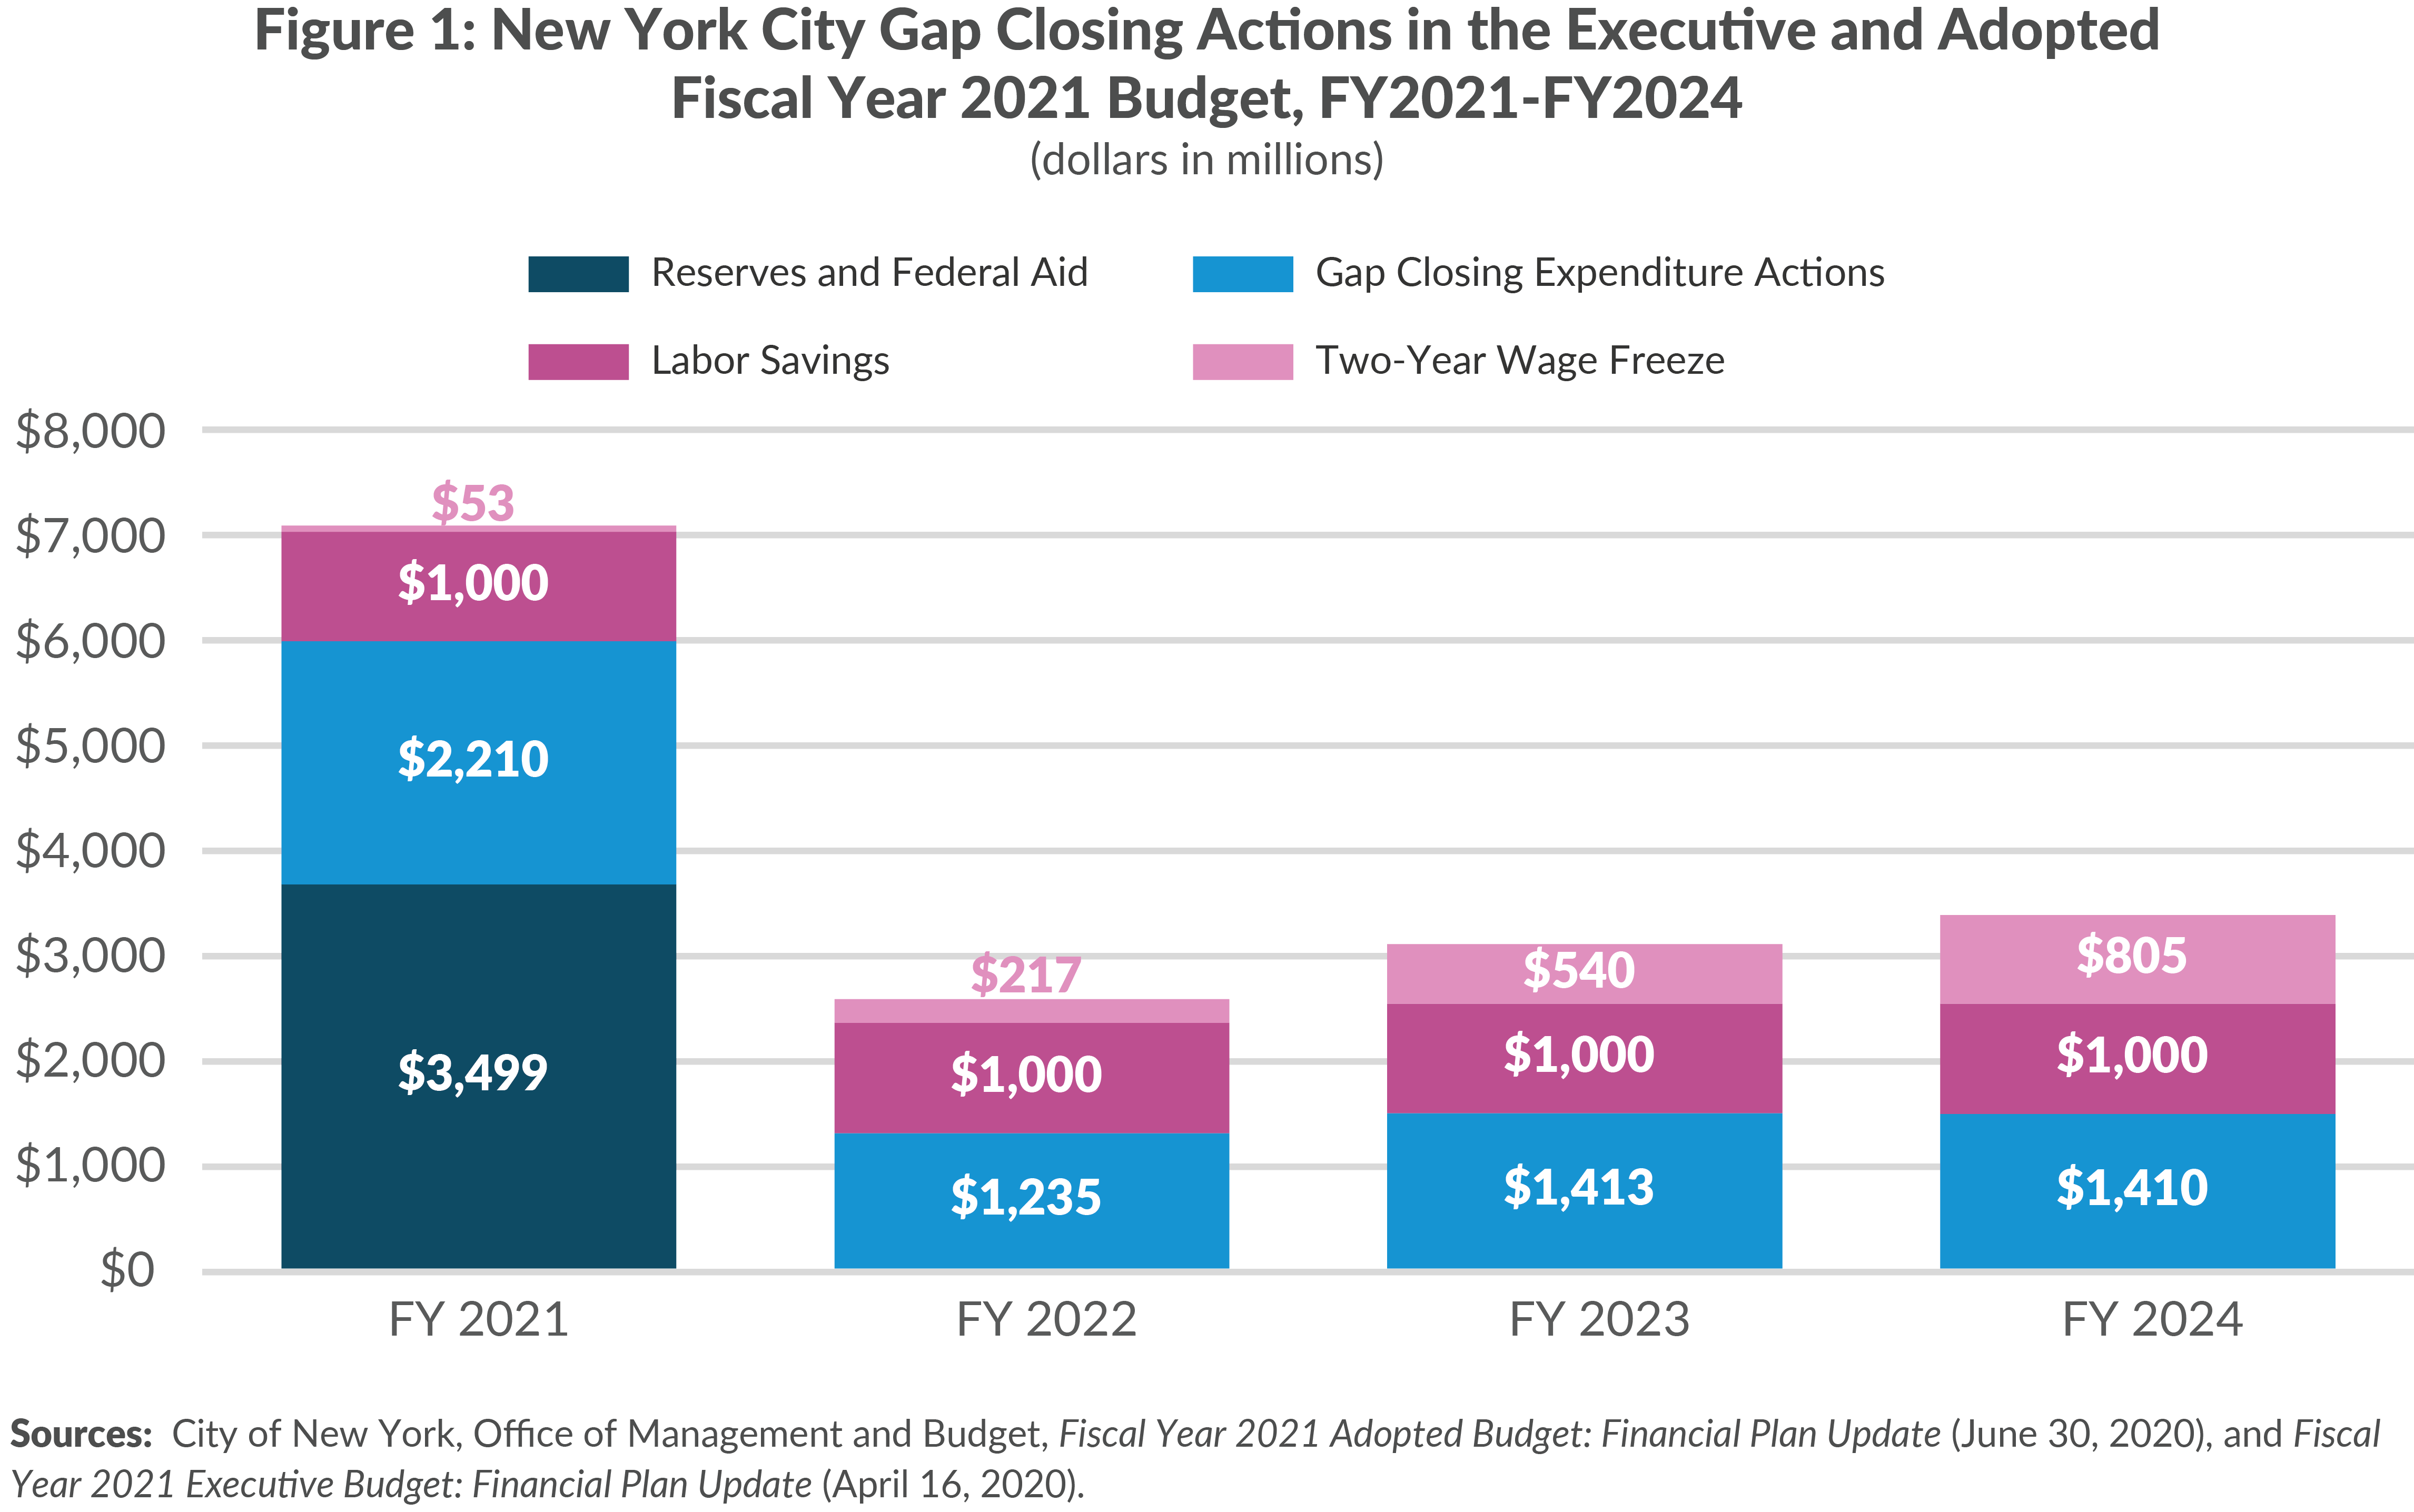 Figure 1: New York City Gap Closing Actions in the Executive and Adopted Fiscal Year 2021 Budget, FY2021-FY2024